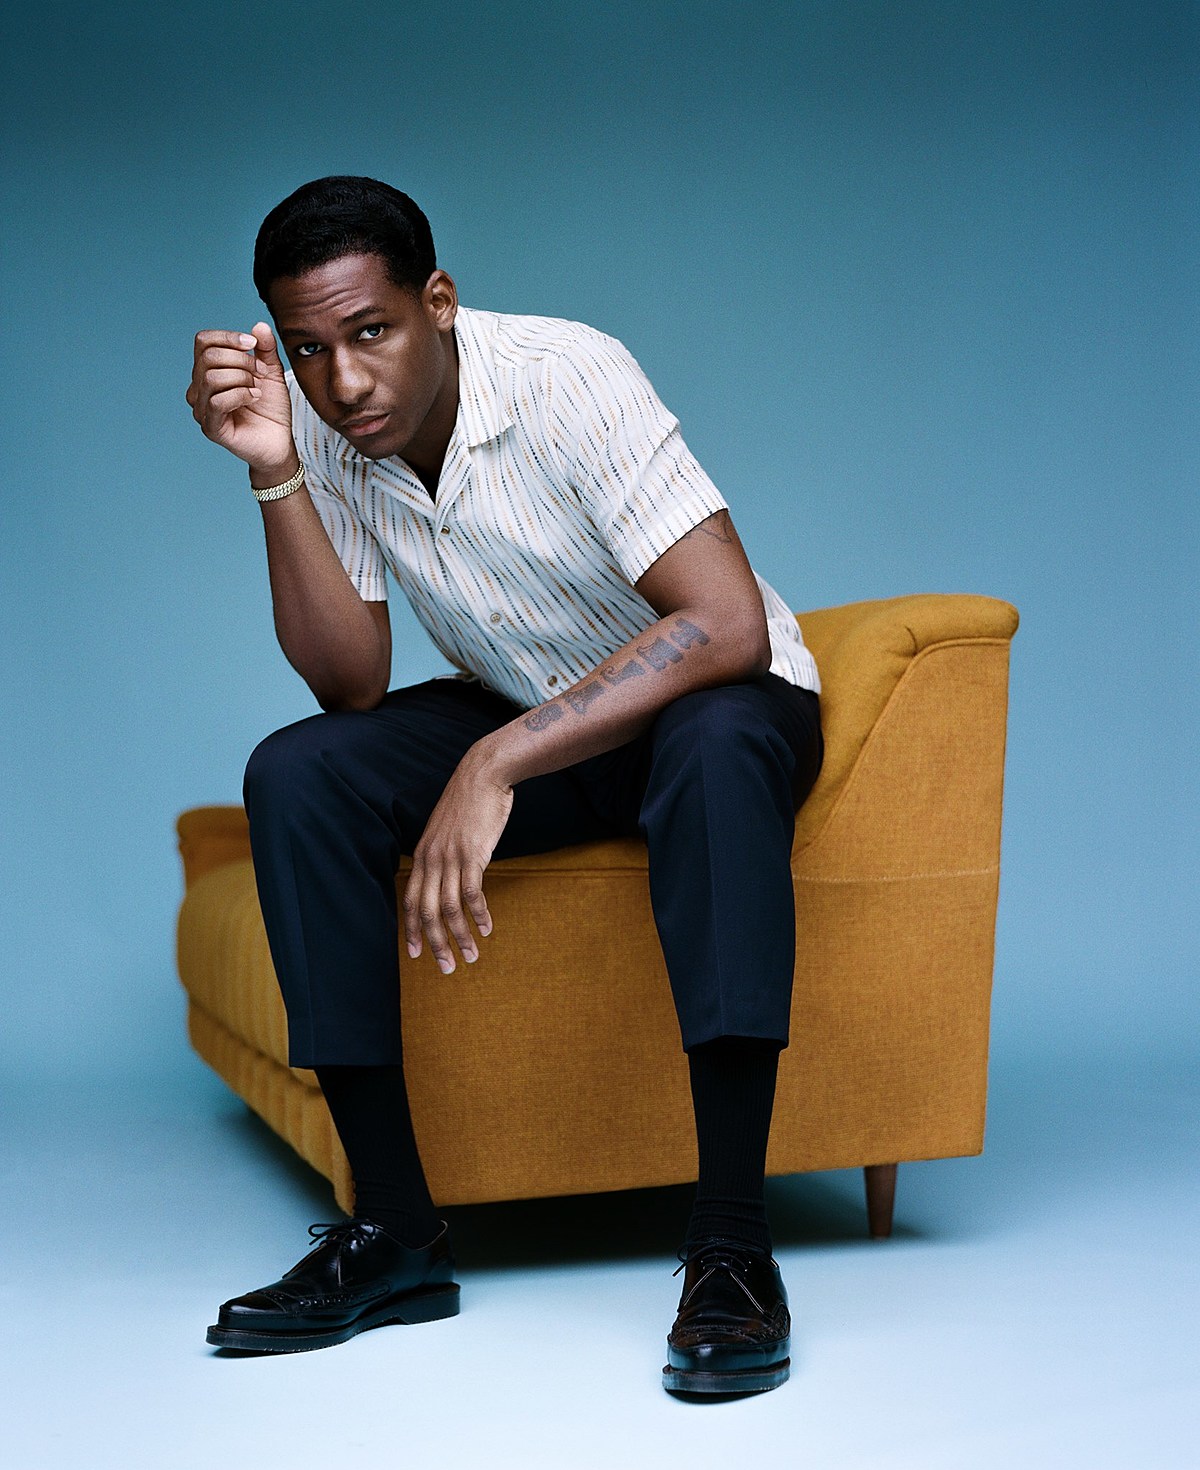 Leon Bridges expands tour, adds intimate LP release shows in NYC & L.A.